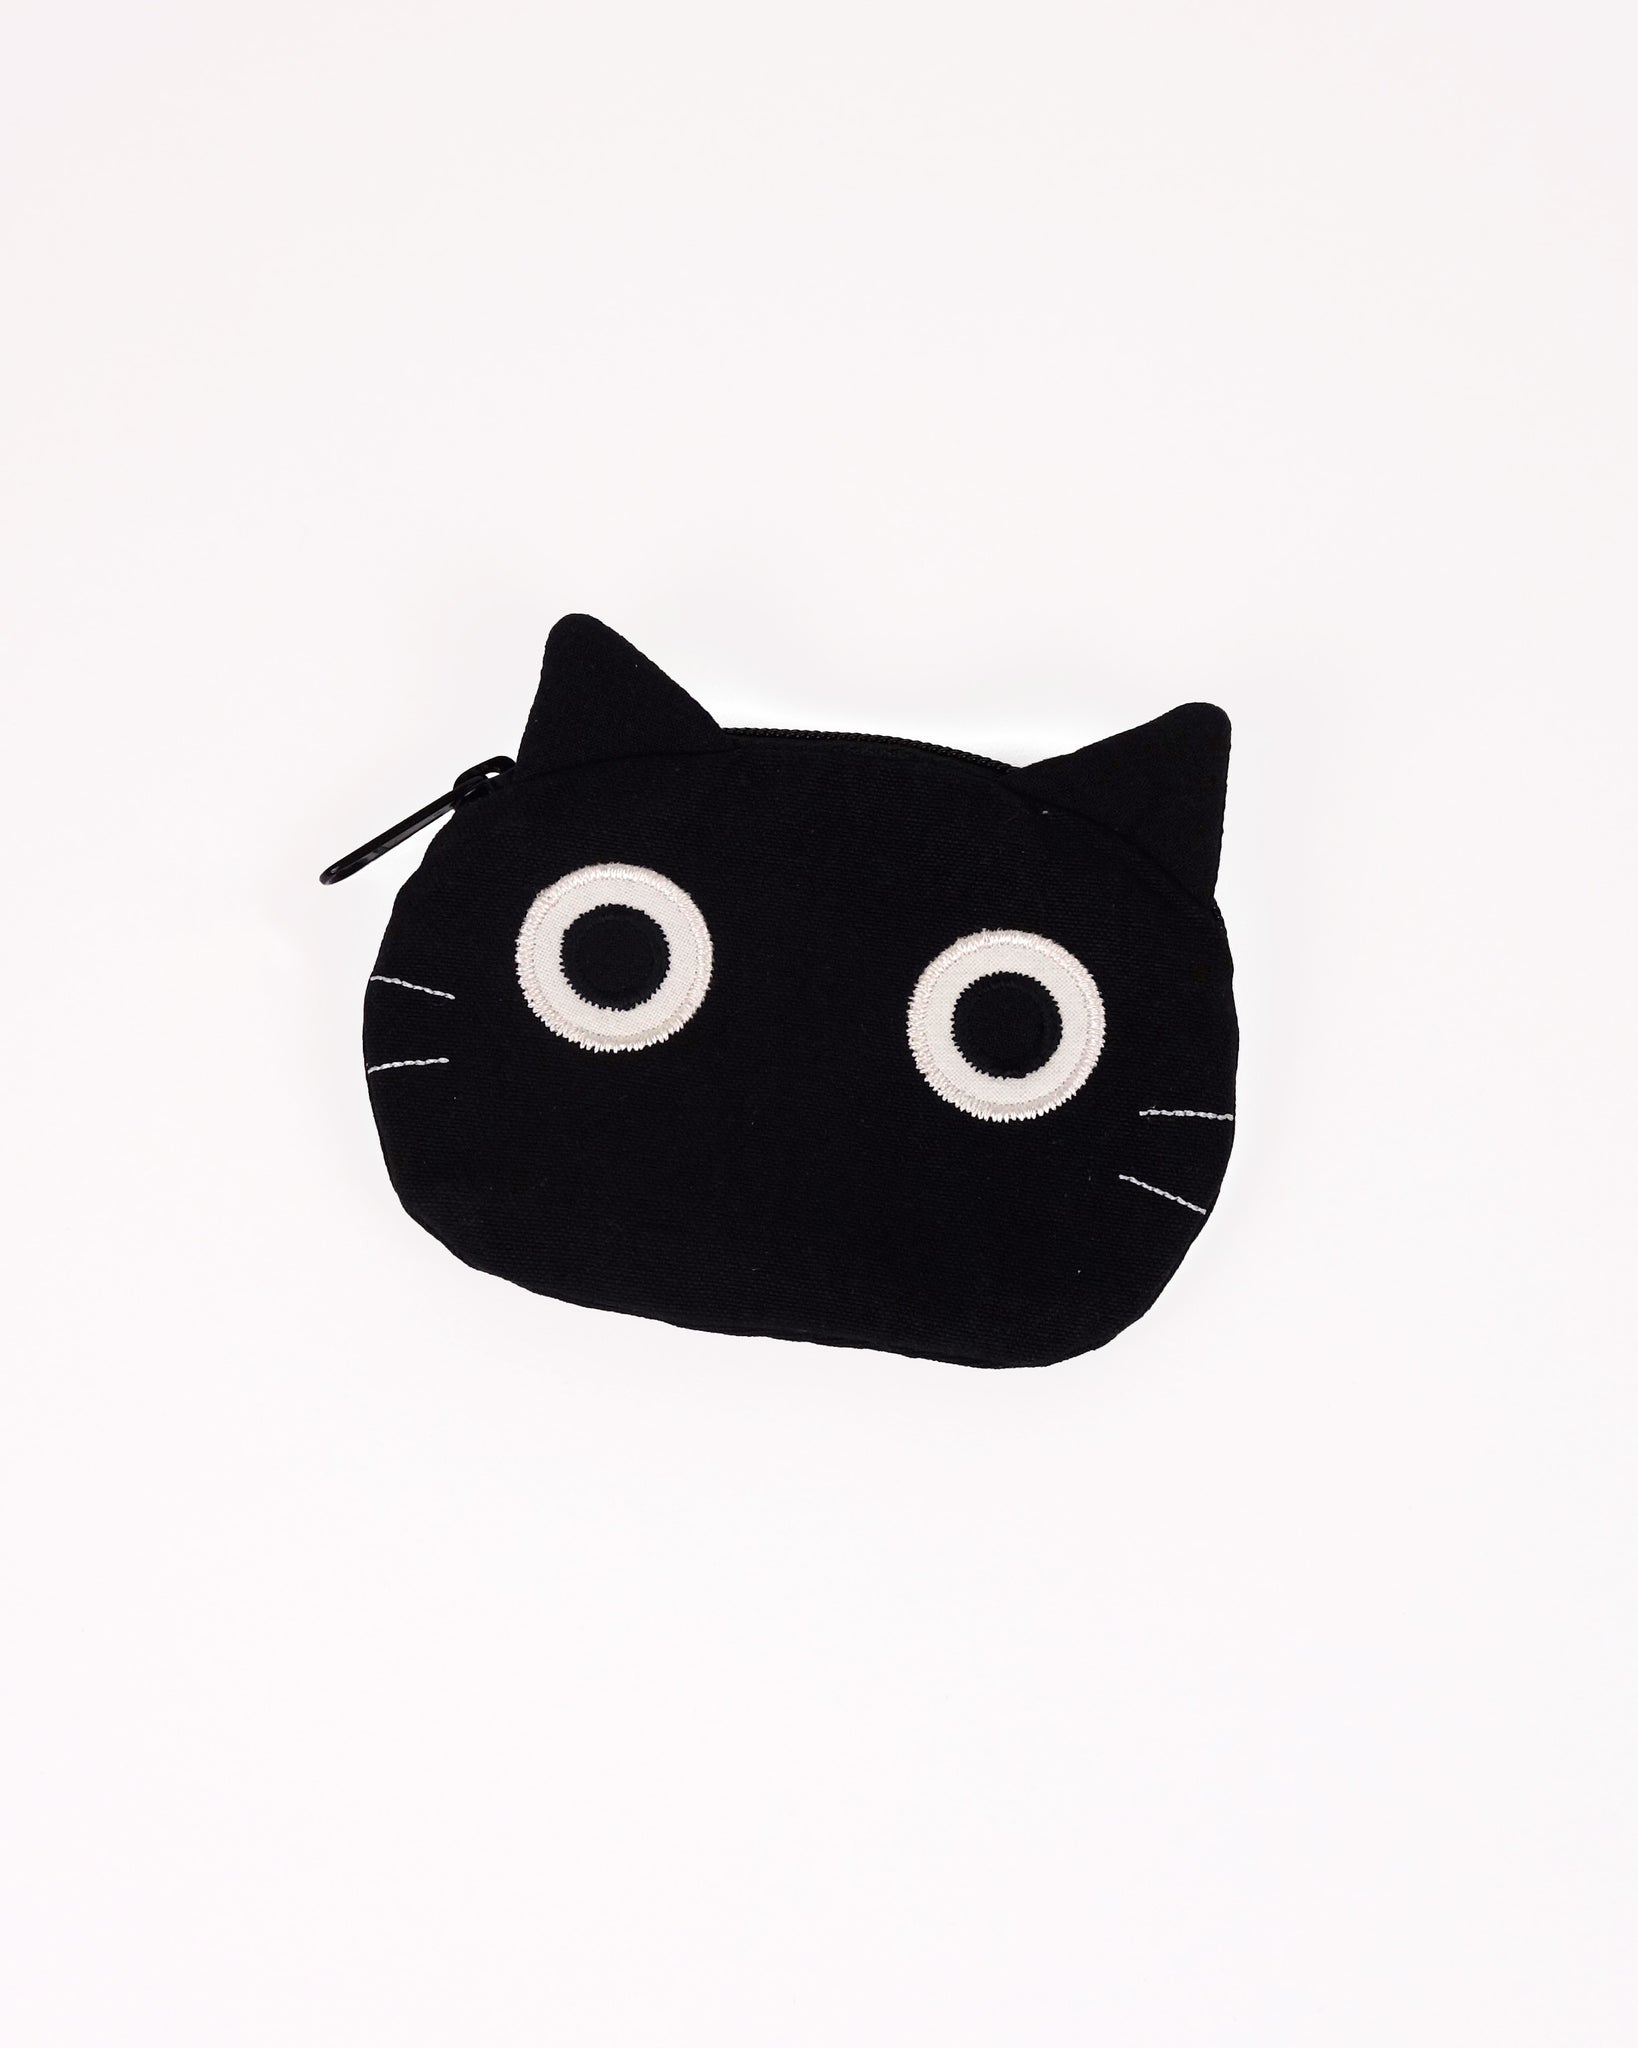 Big Eyes Coin Pouch